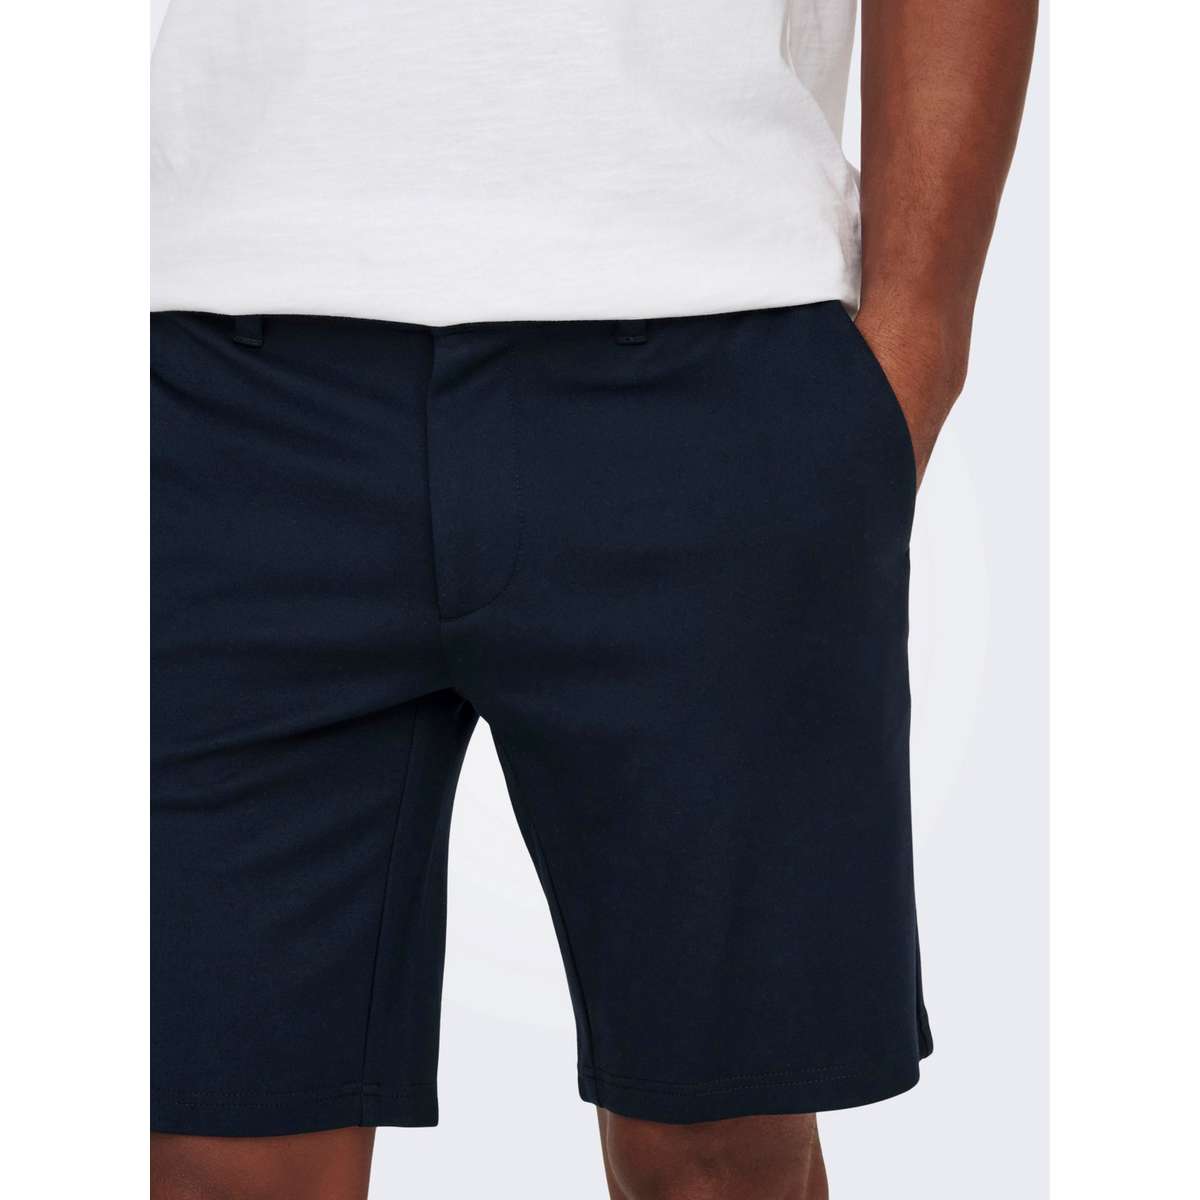 ONLY & SONS MEN’S REGULAR FIT COTTON CHINO SHORTS BLUE 22018667 NIGHT SKY 